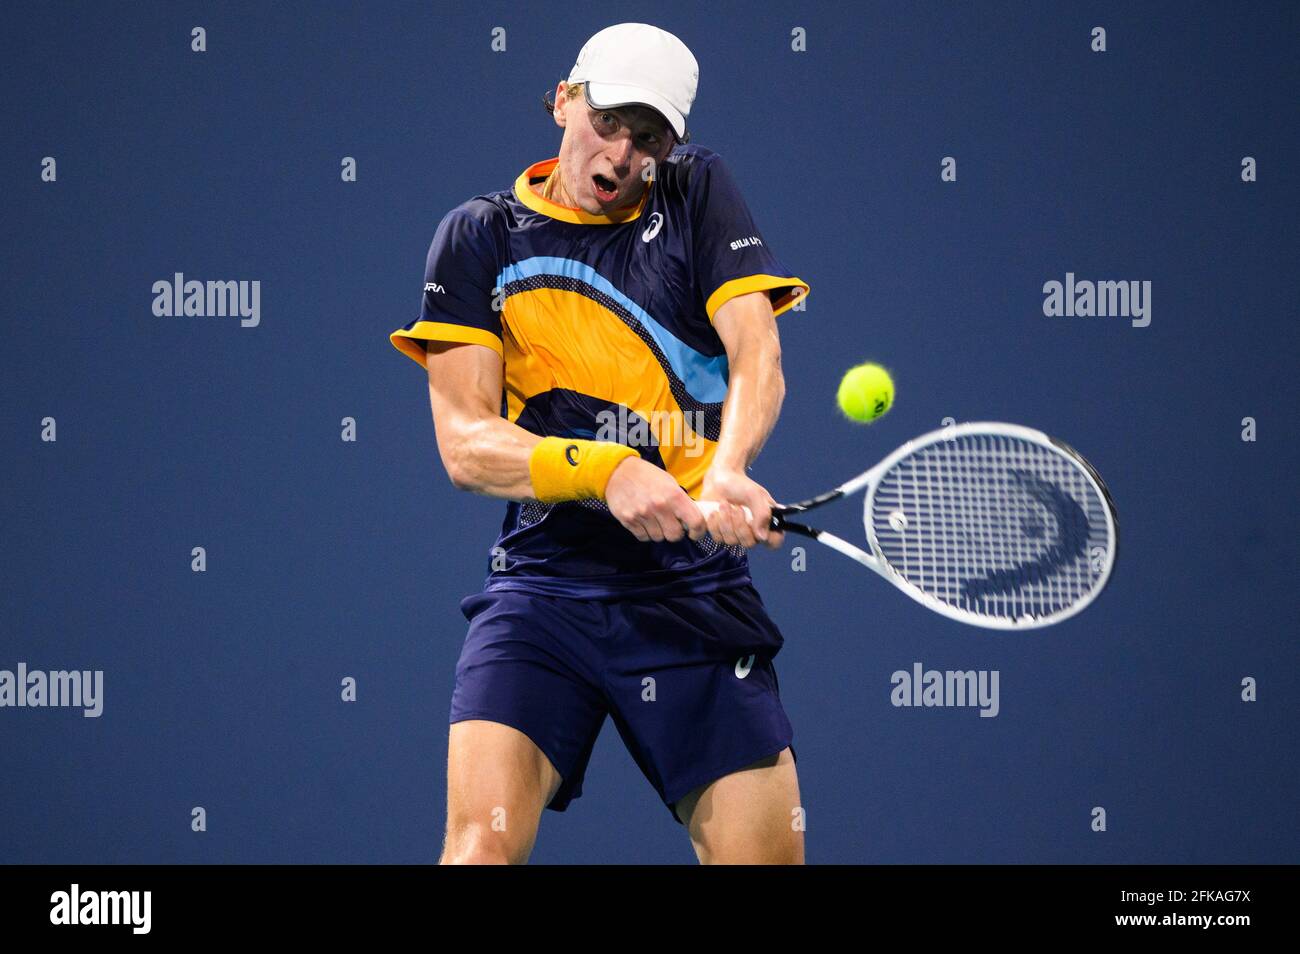 March 24, 2021: Emil Ruusuvuori of Finland hits a backhand during his  victory over Carlos Alcaraz of Spain in the first round at the Miami Open  on March 24, 2021 on the